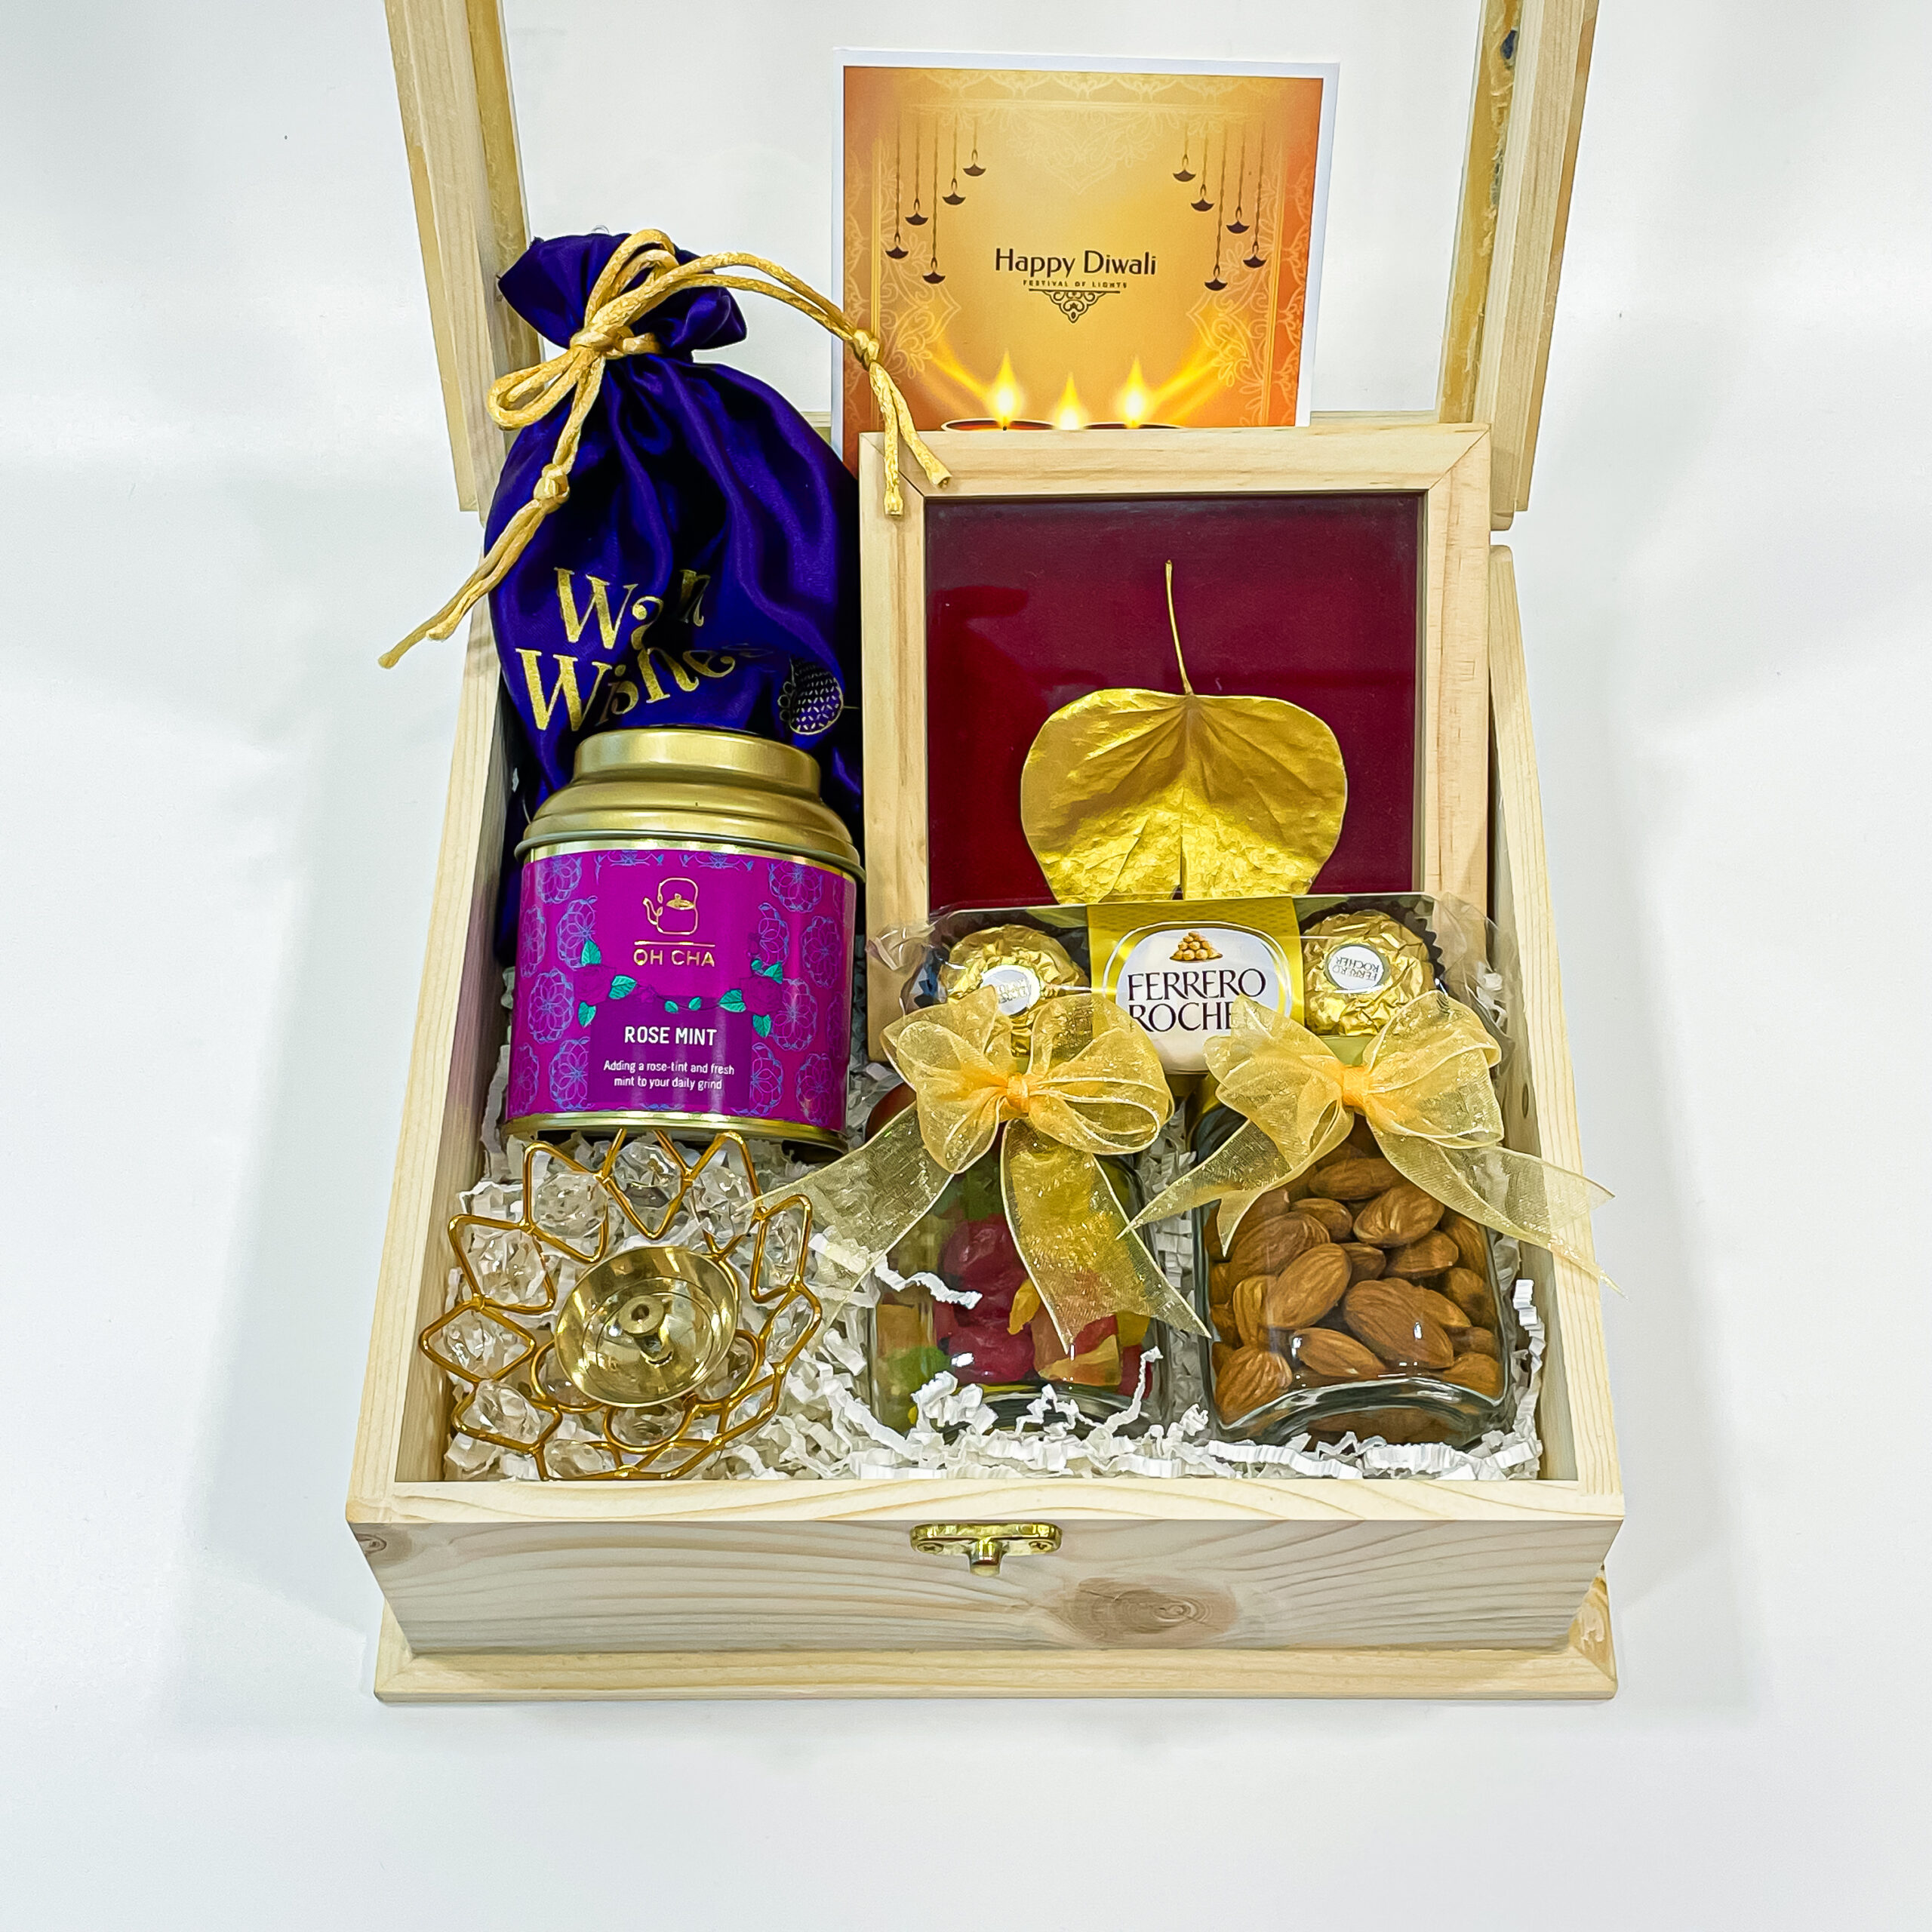 TIED RIBBONS Handcrafted Karwachauth Thali Set with Cover Combo - Steel  Thali Lota Channi and Karwa Chauth Pooja Samagri Kit with Box - Gift for  Wife Sister Mother in Law Friends :